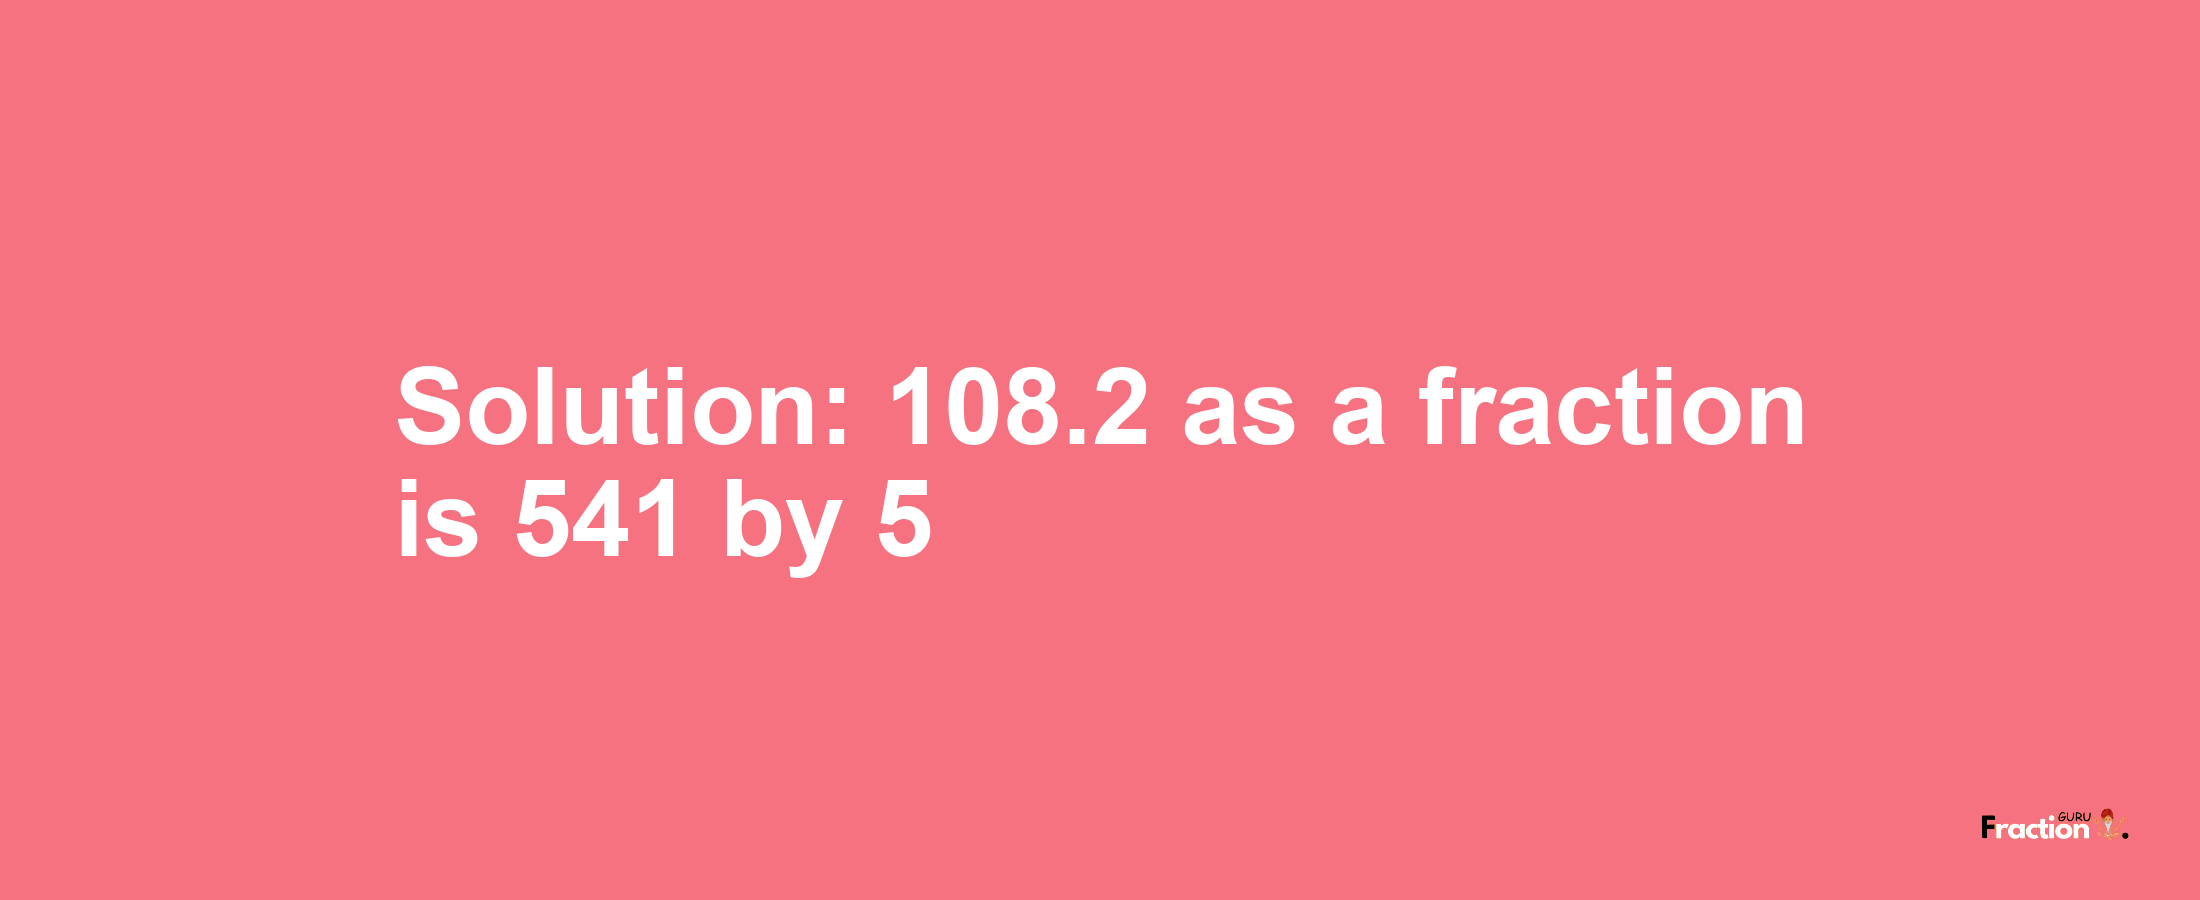 Solution:108.2 as a fraction is 541/5